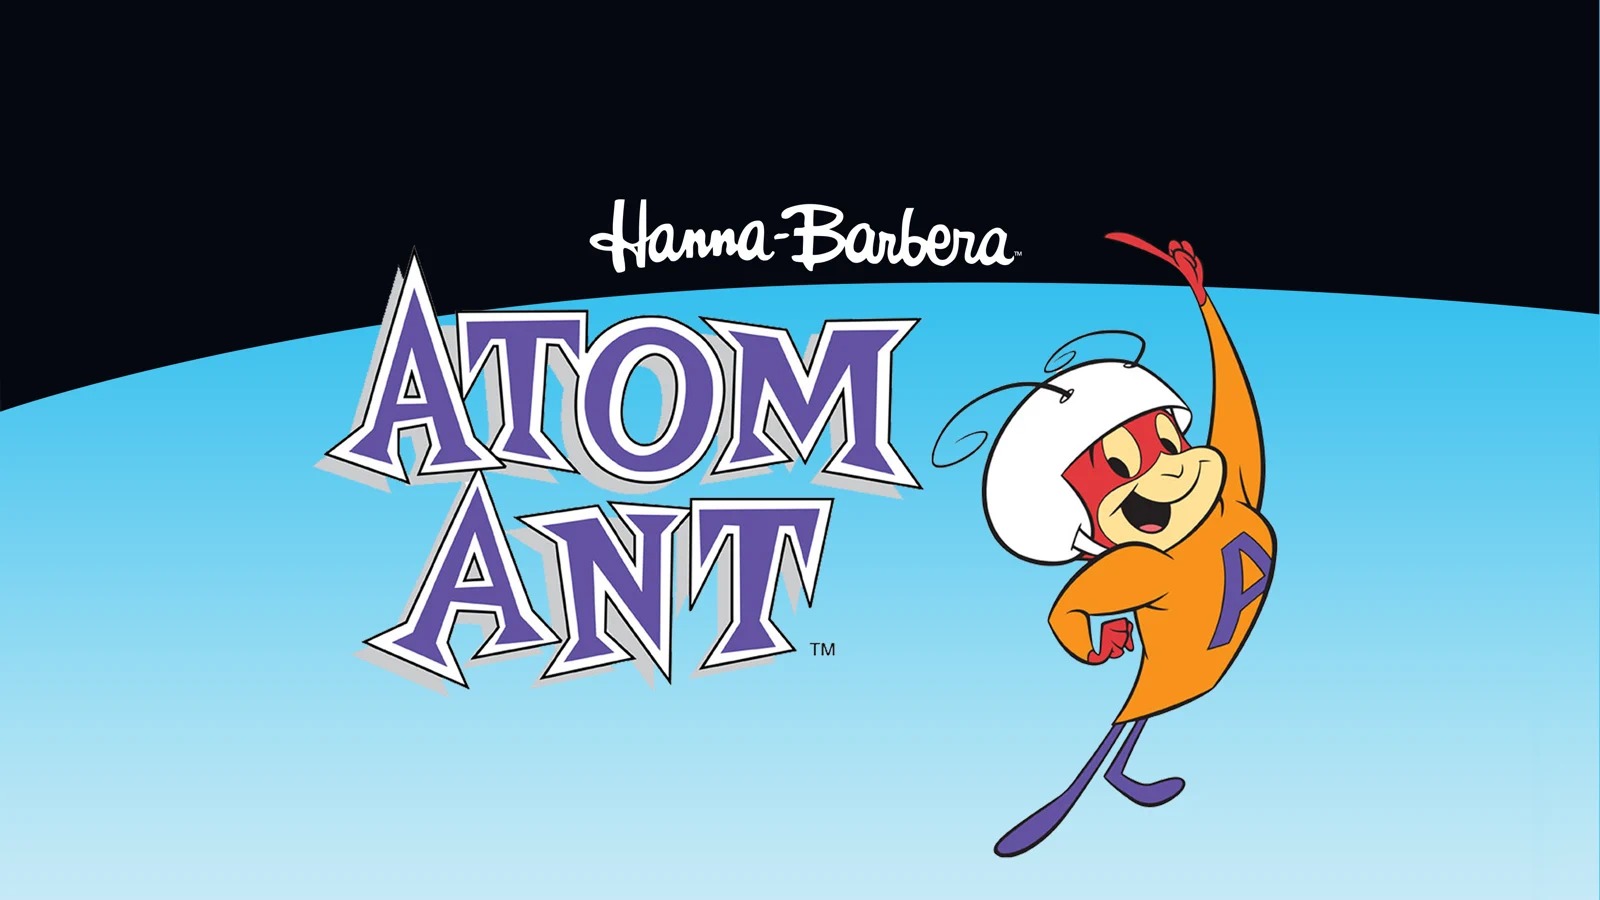 11-facts-about-atom-ant-the-atom-ant-secret-squirrel-show